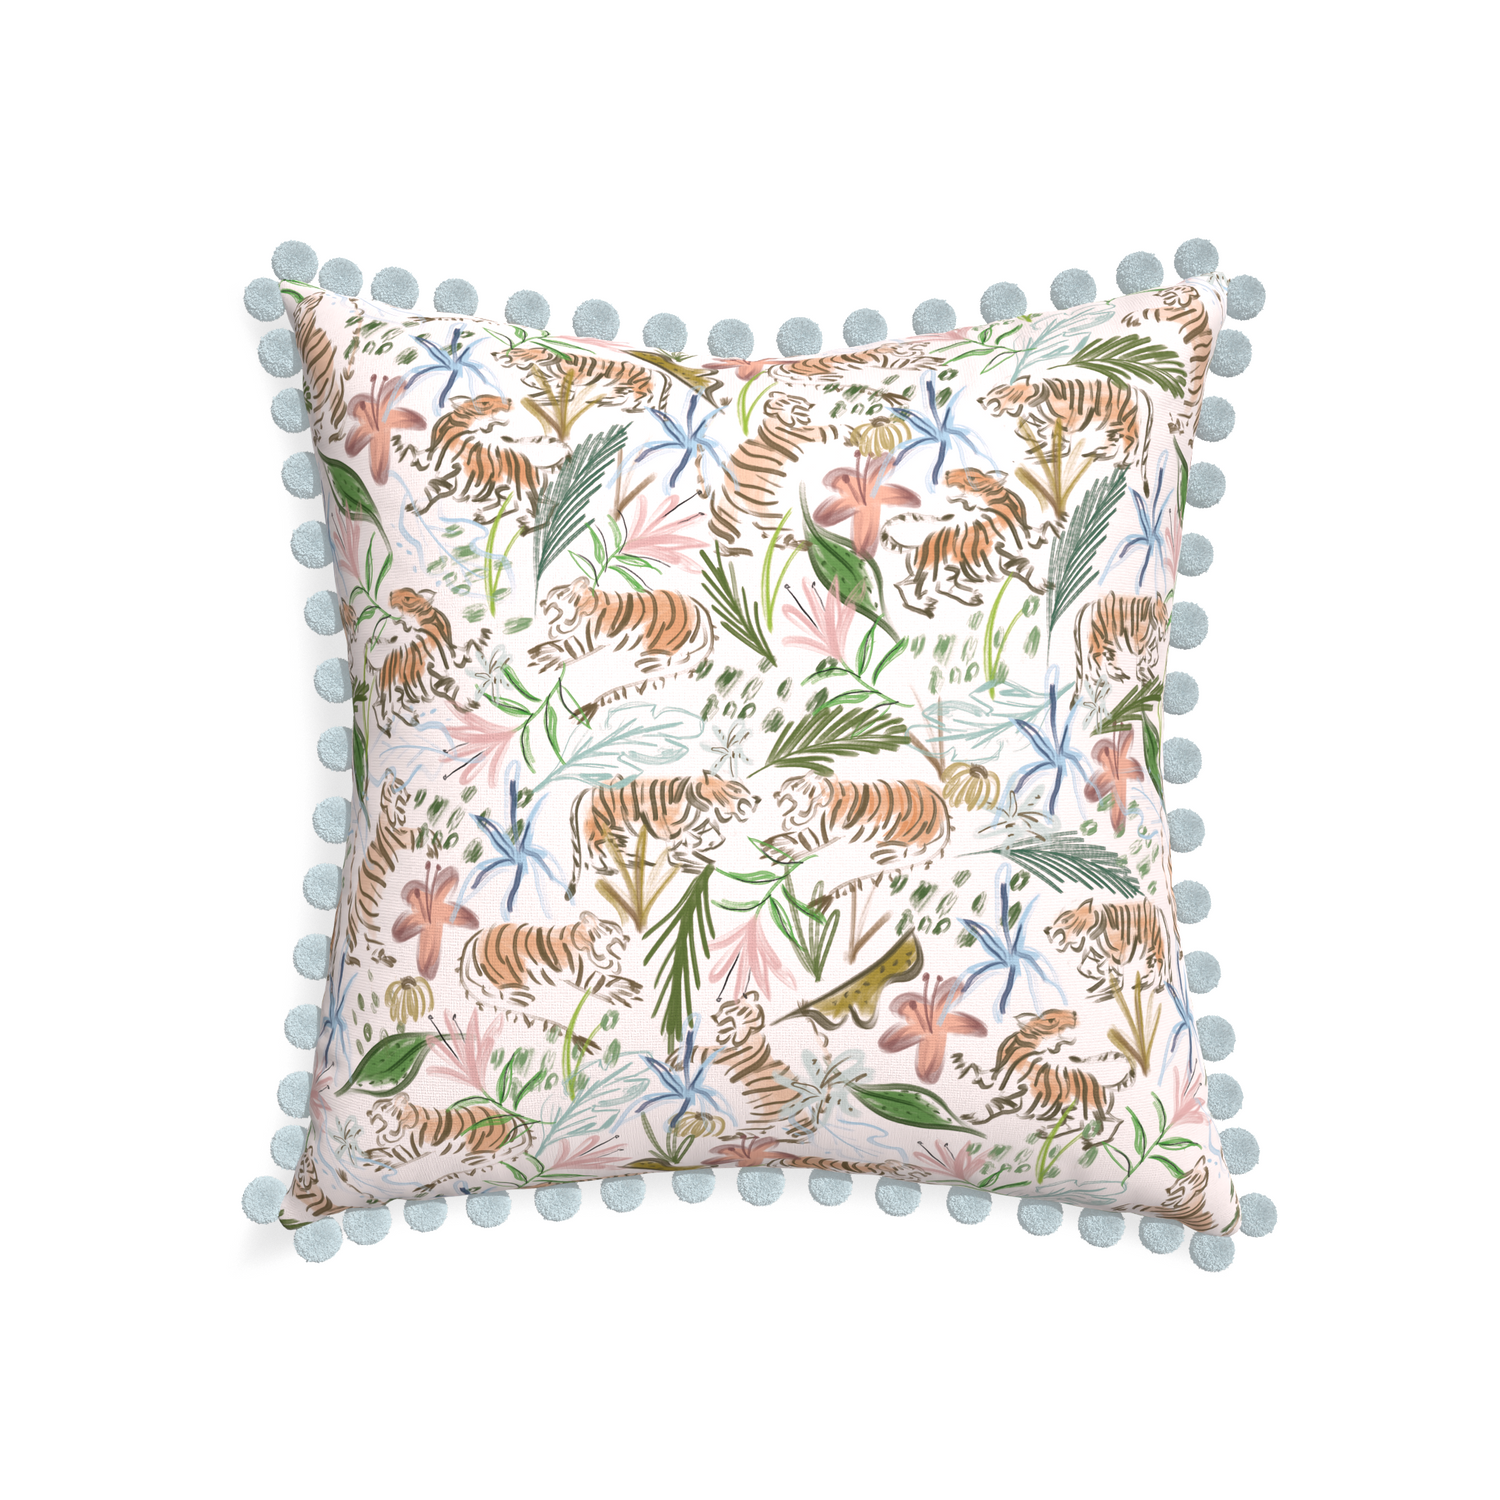 22-square frida pink custom pink chinoiserie tigerpillow with powder pom pom on white background